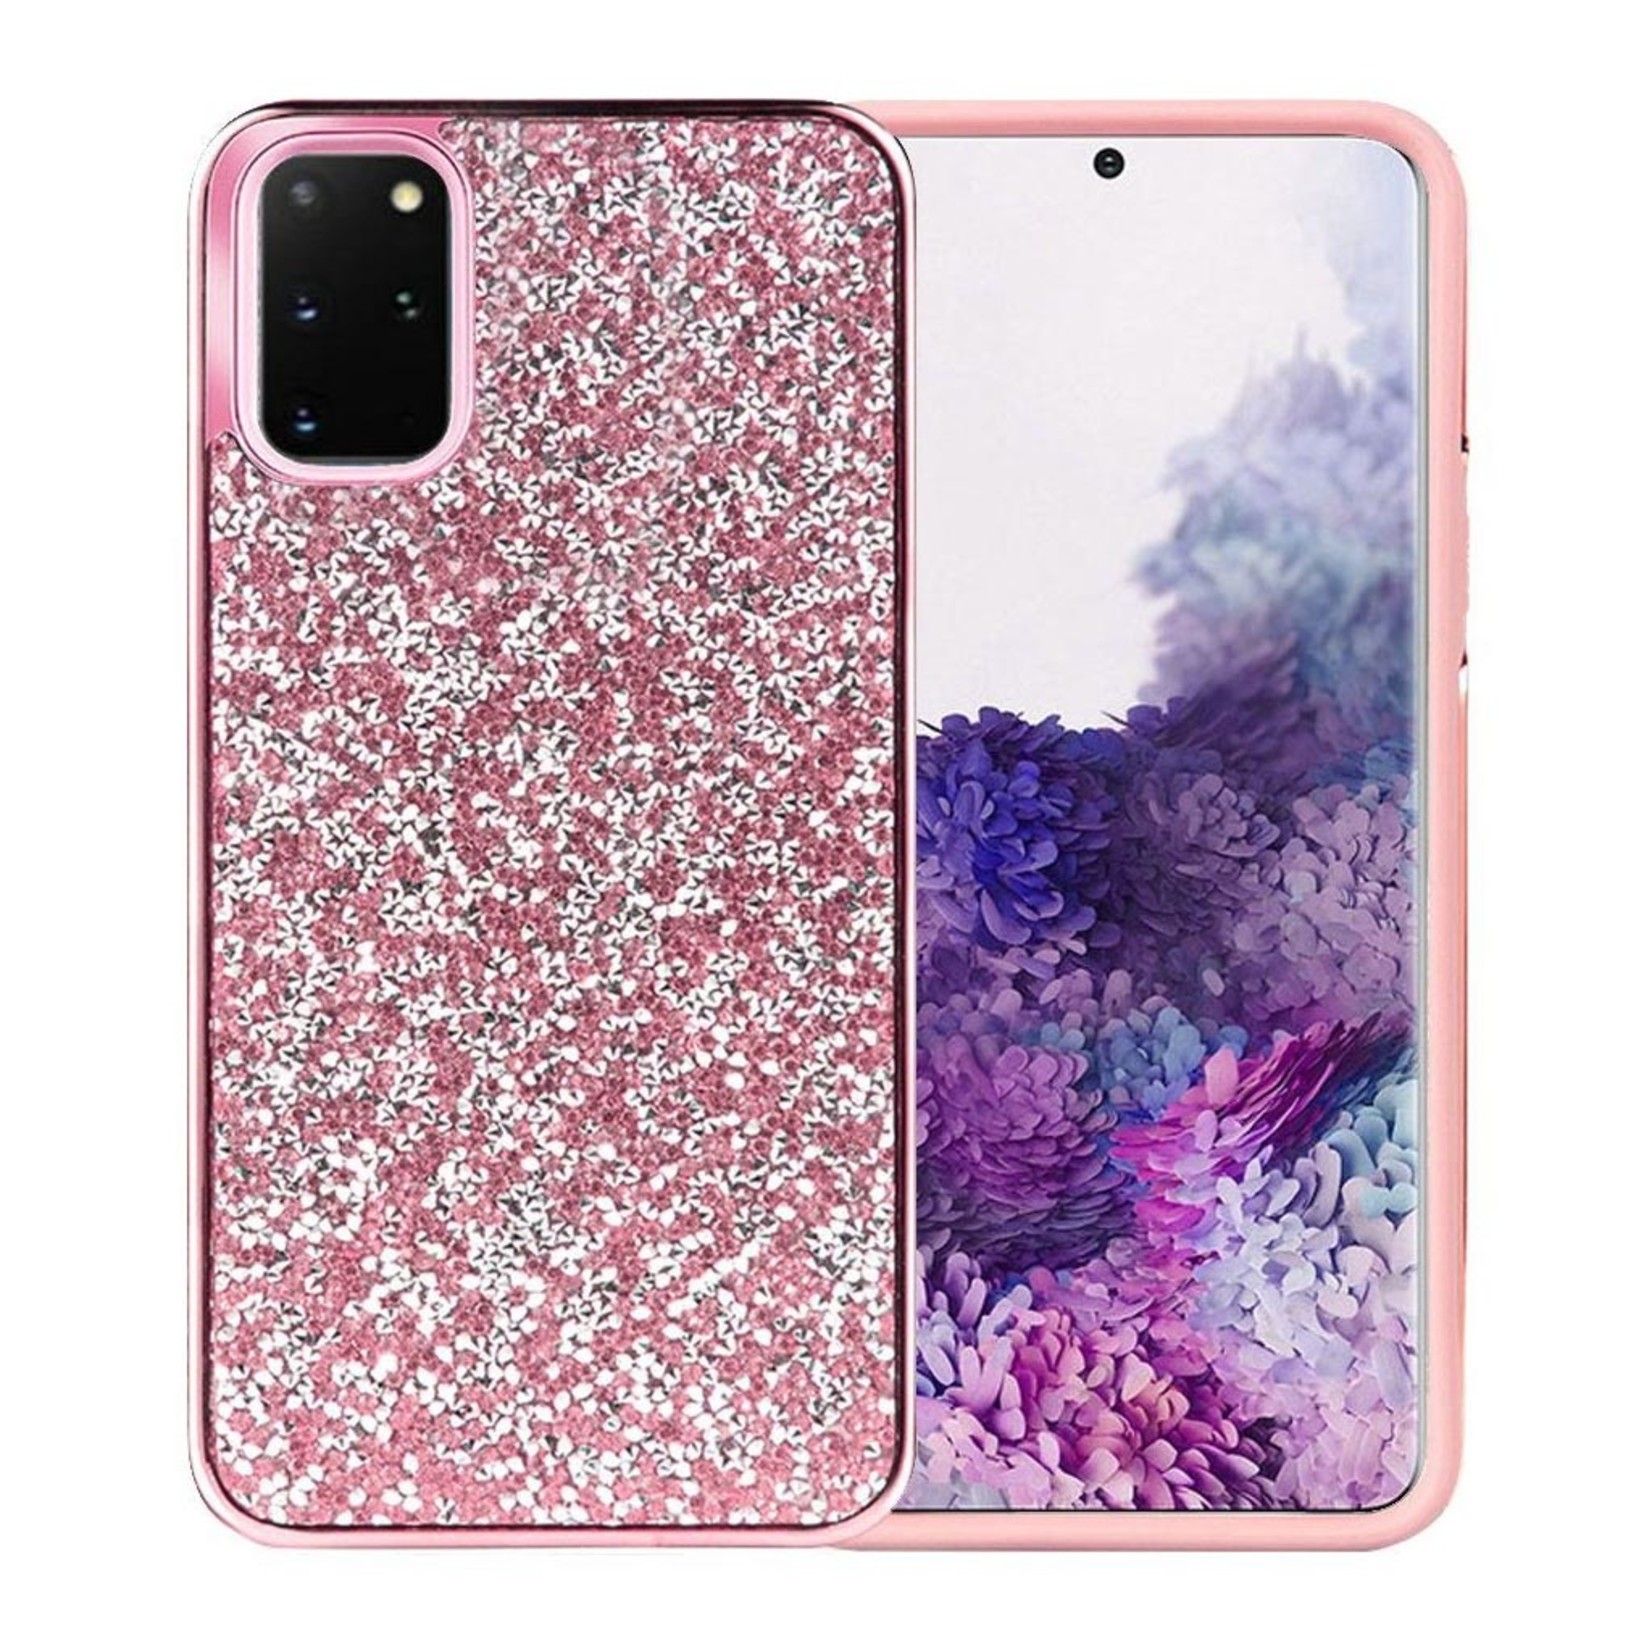 Hybrid PC TPU Deluxe Glitter Diamond Electroplated Case for Galaxy S20